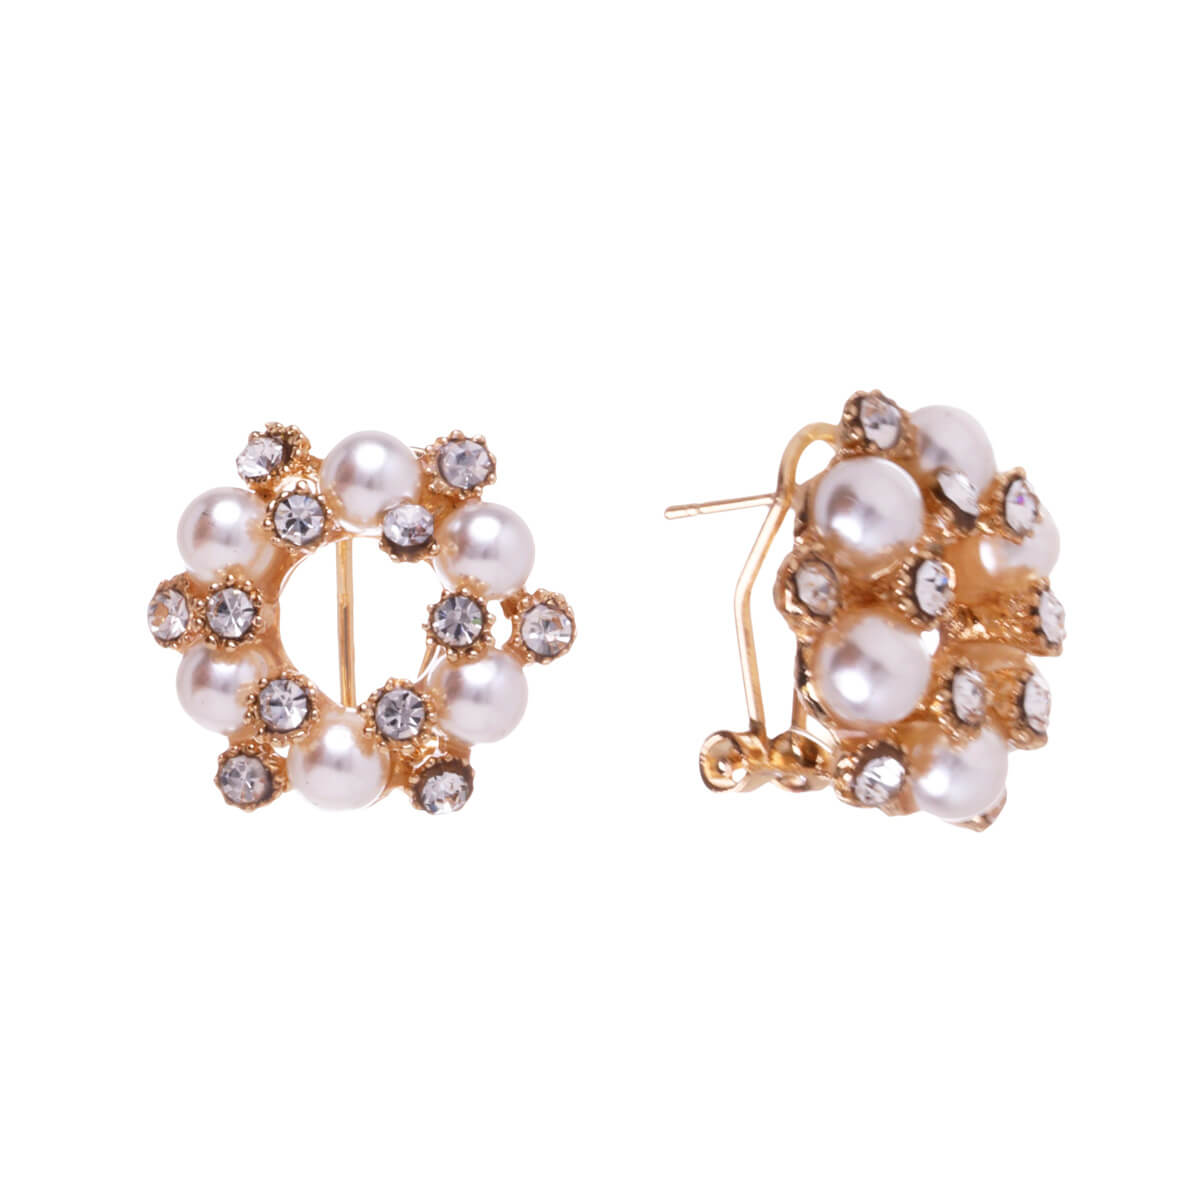 Glass stone and pearl decorated ring earring